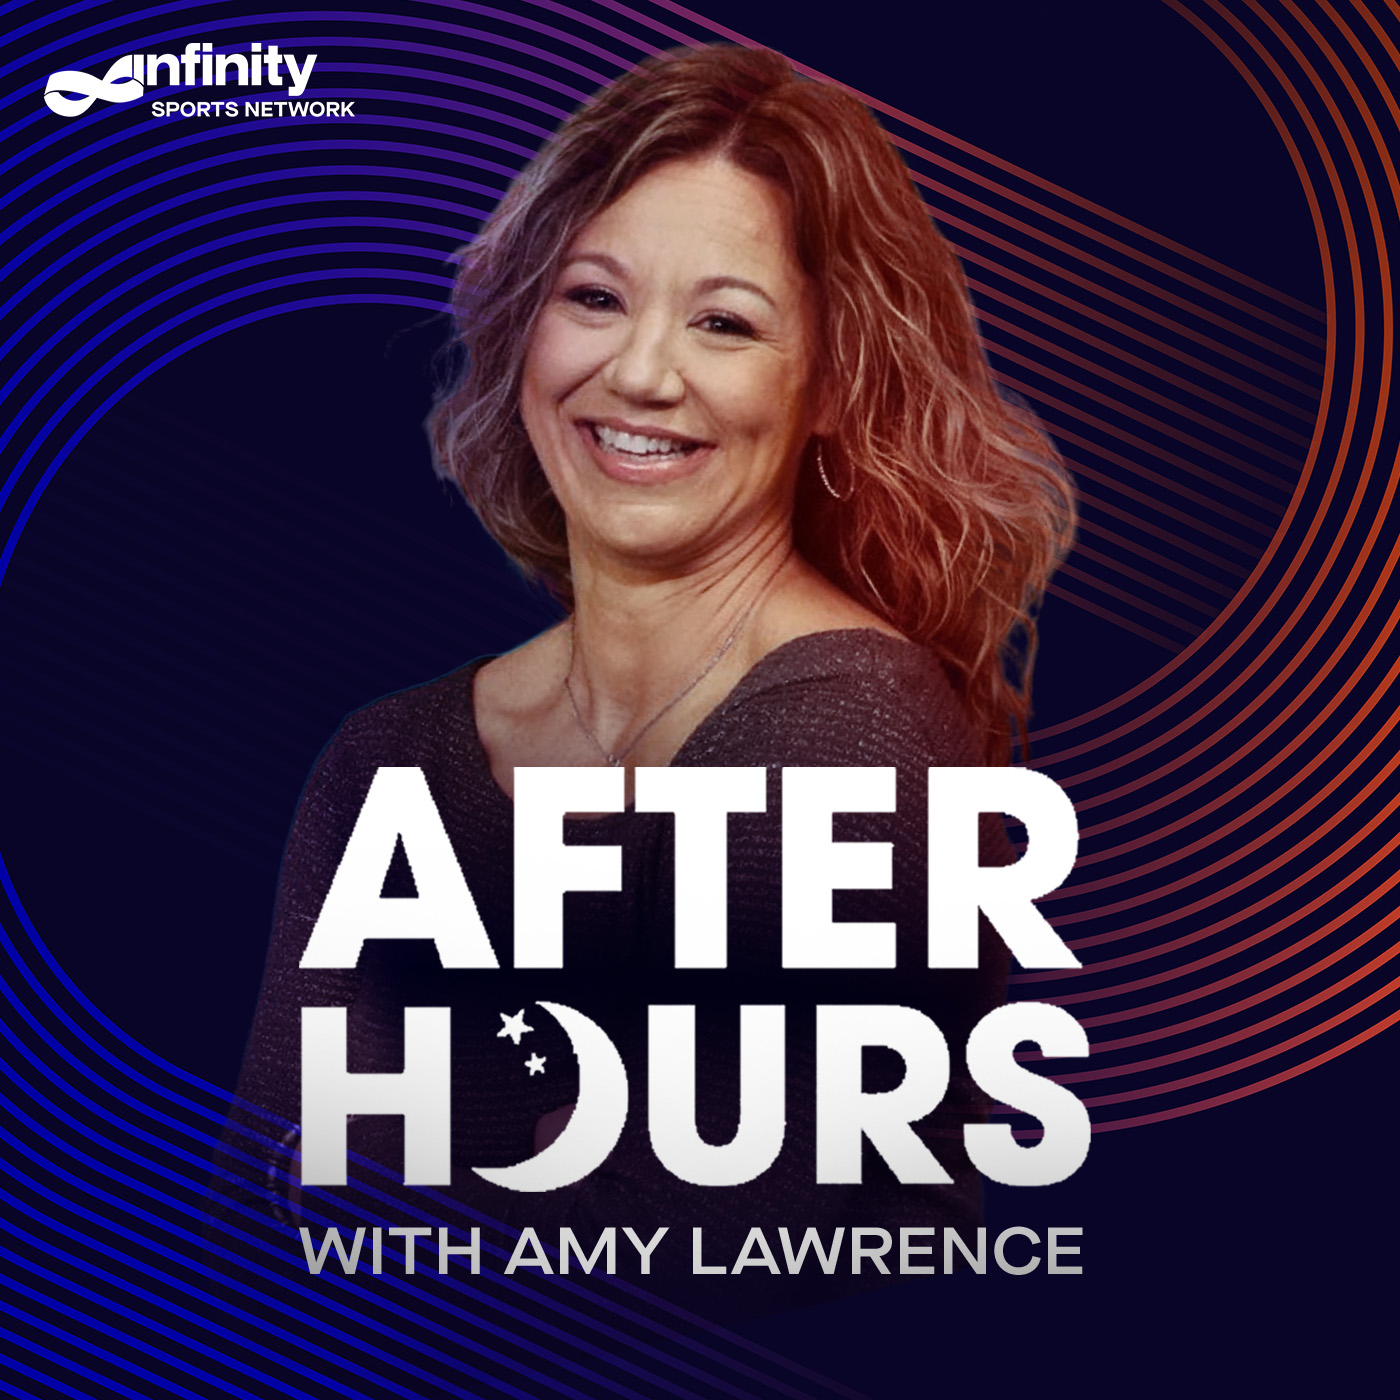 2-10-22 After Hours with Amy Lawrence PODCAST: Hour 1